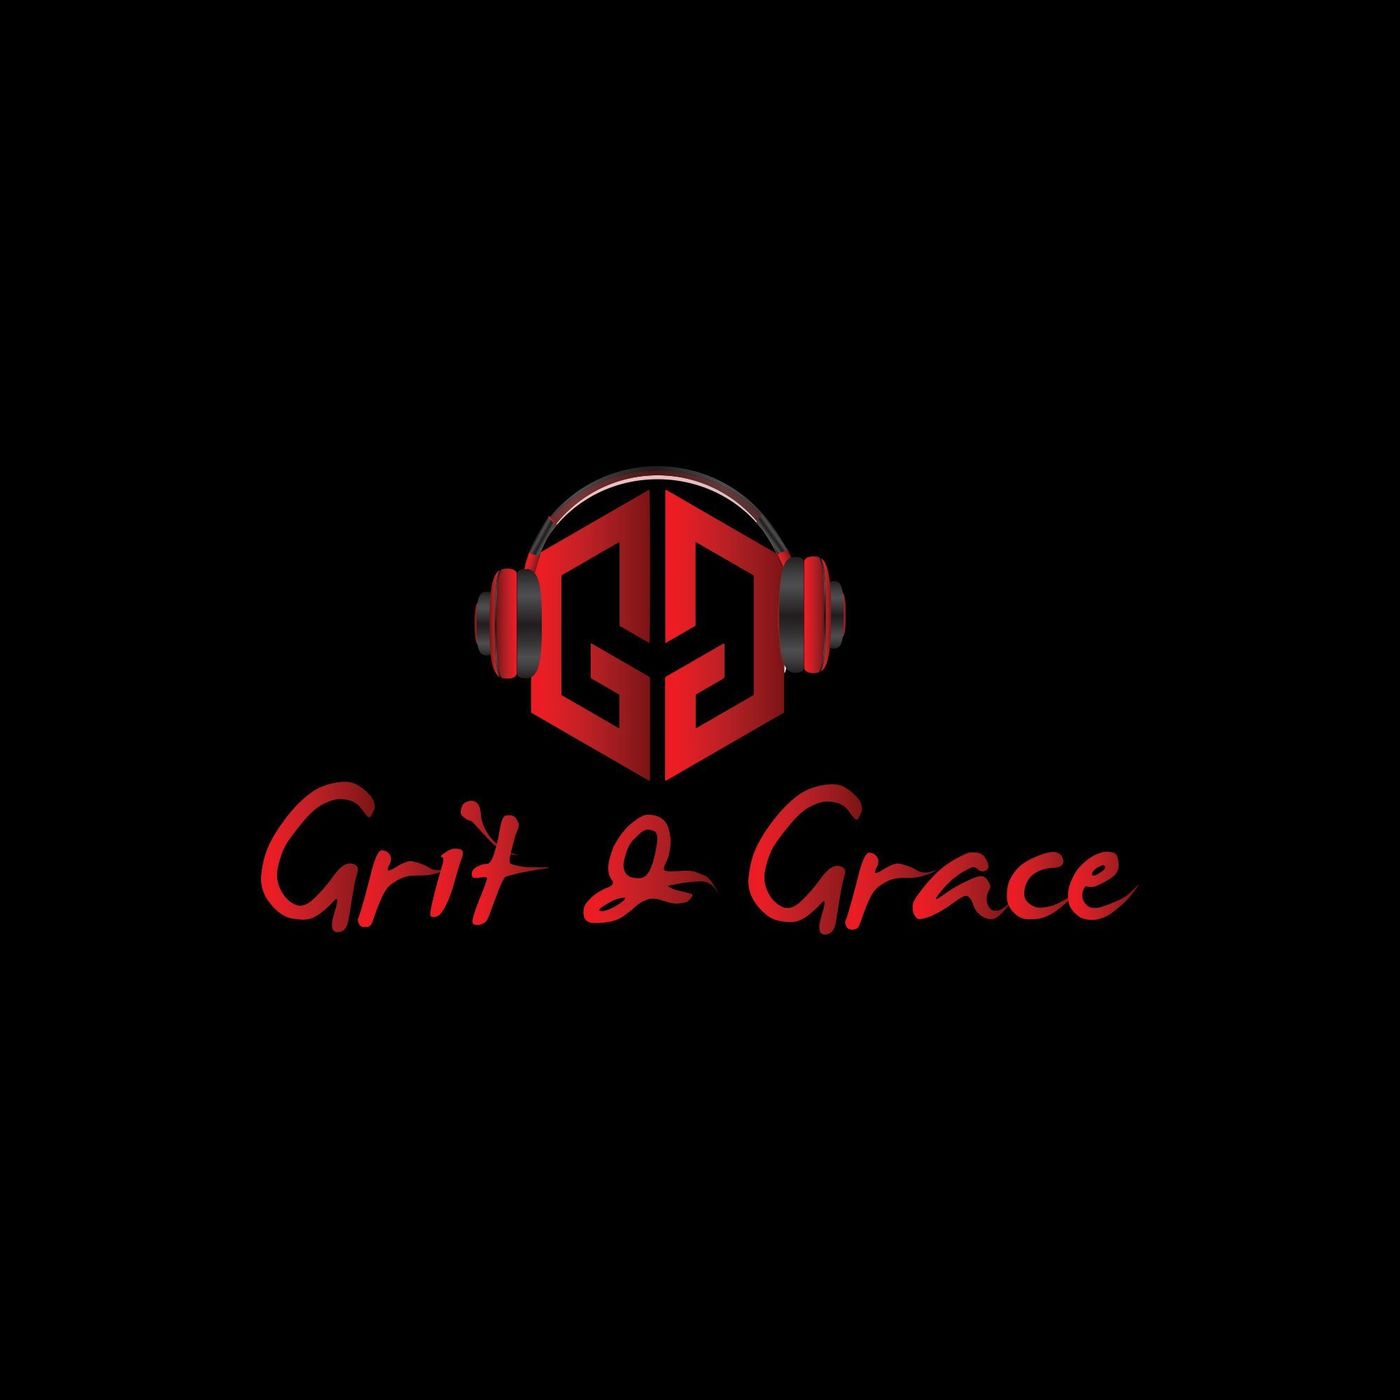 Grit and Grace: The Mistress of Marketing Image